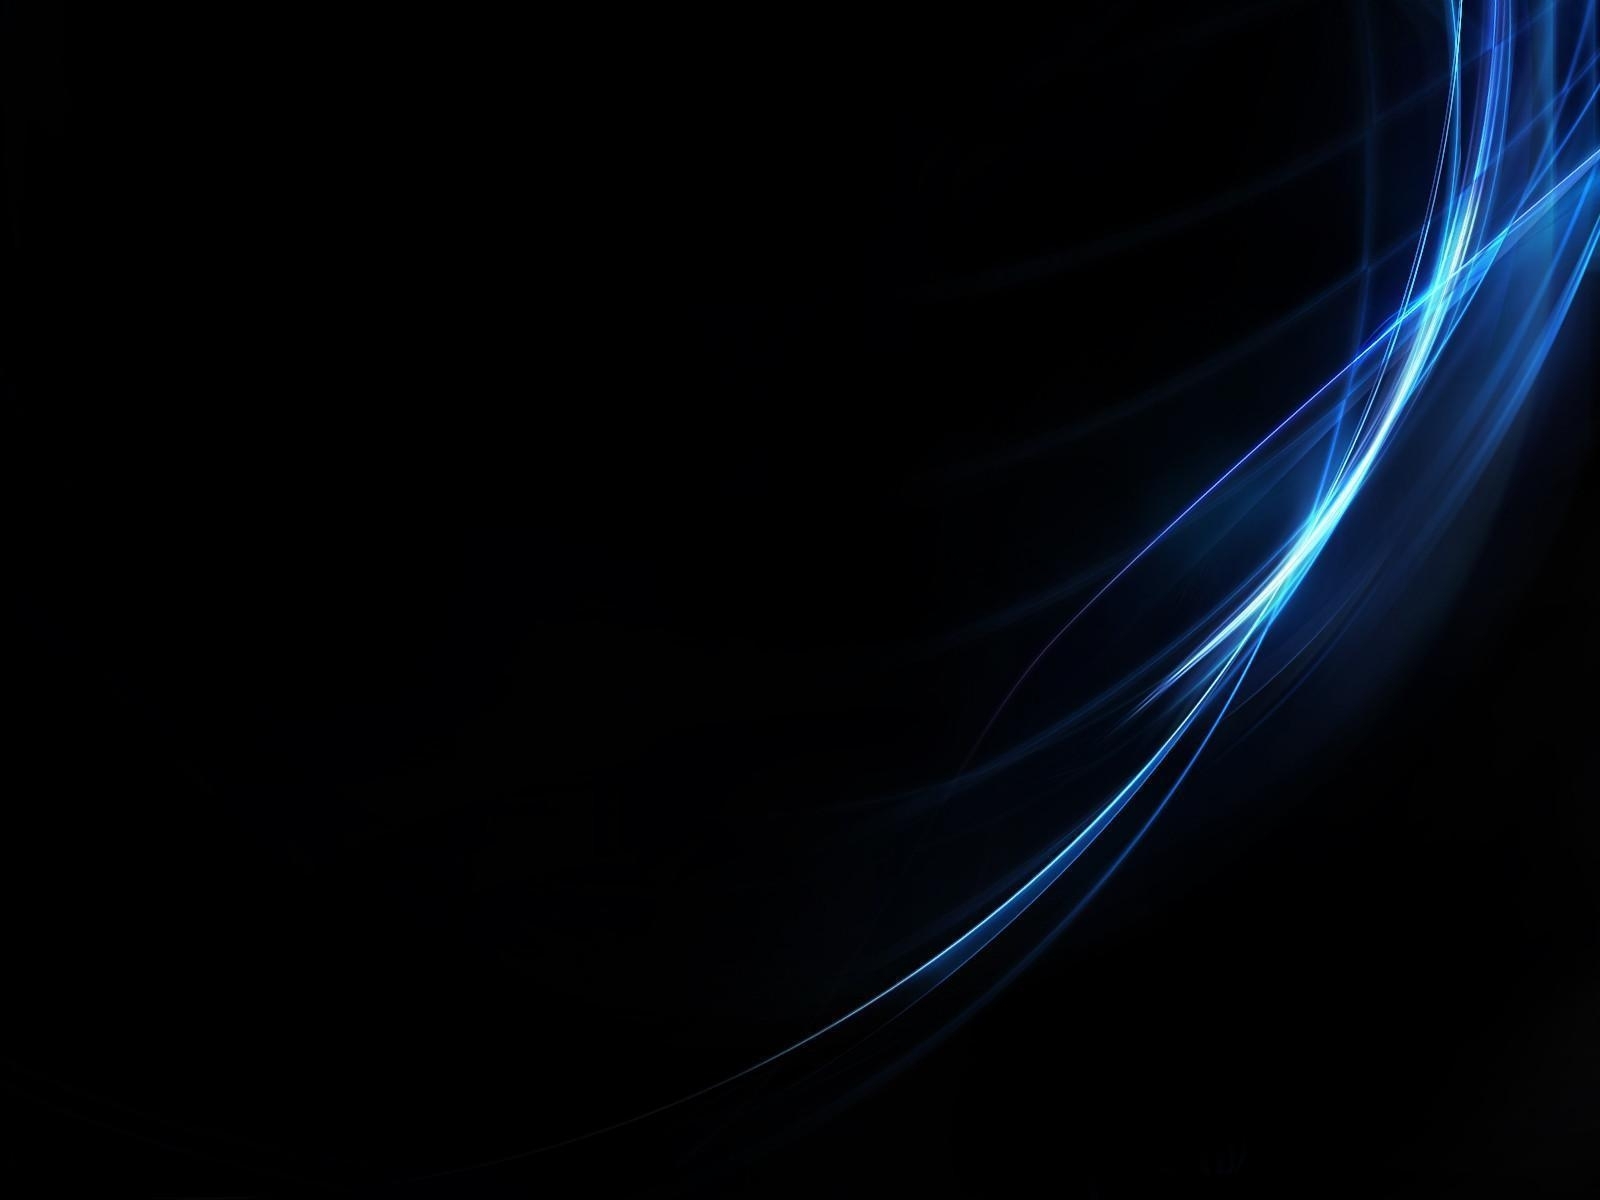 10 Latest Blue And Black Abstract Wallpaper FULL HD 1080p For PC Desktop